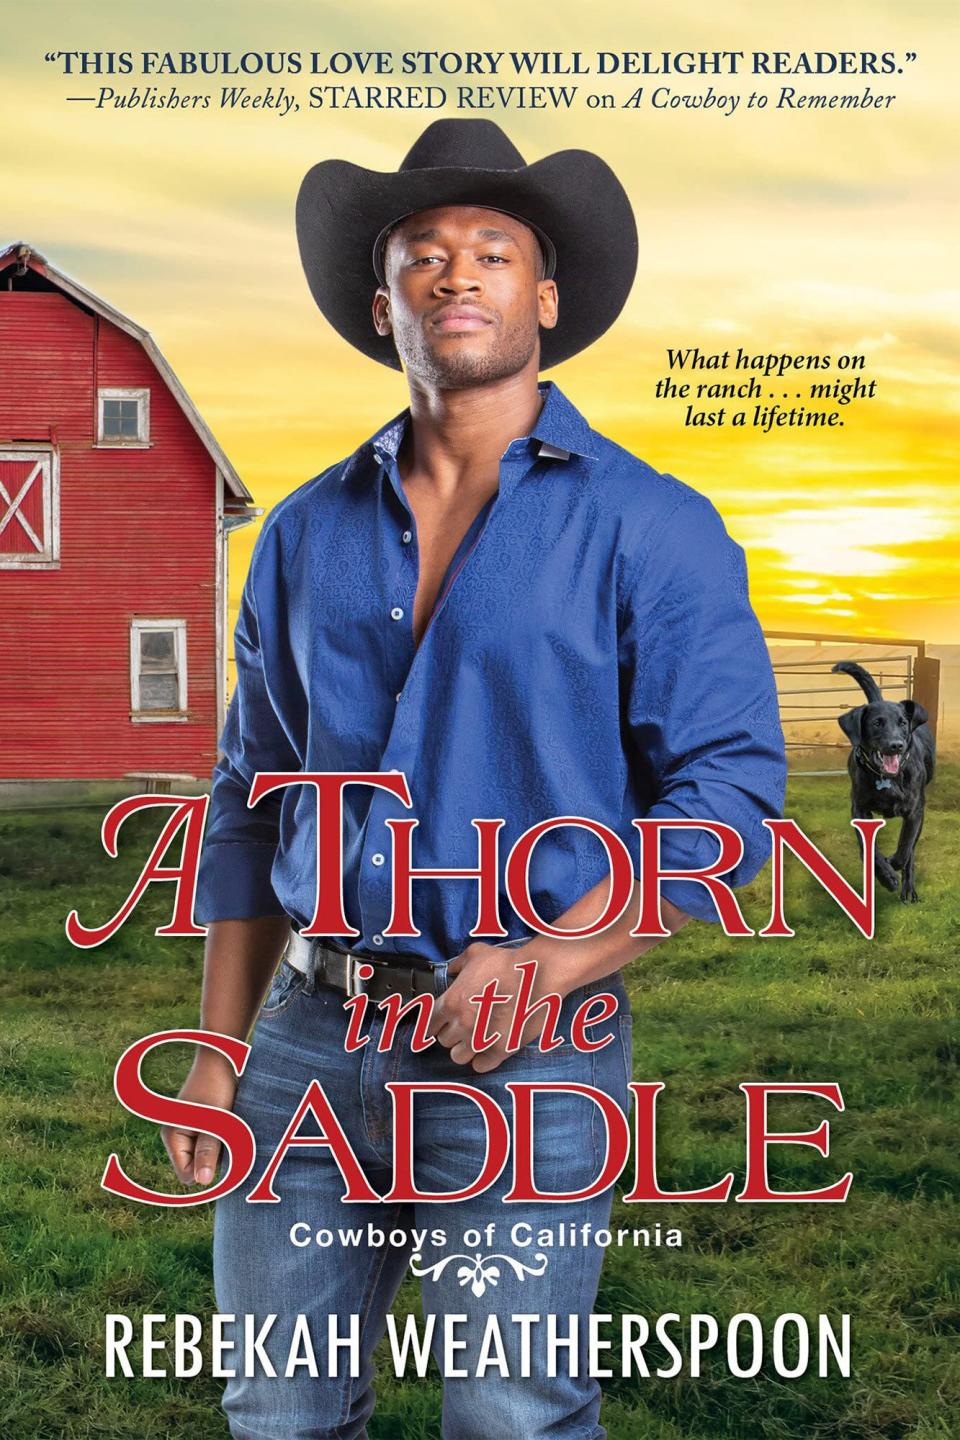 A Thorn in the Saddle (Cowboys of California) Paperback – October 26, 2021 by Rebekah Weatherspoon